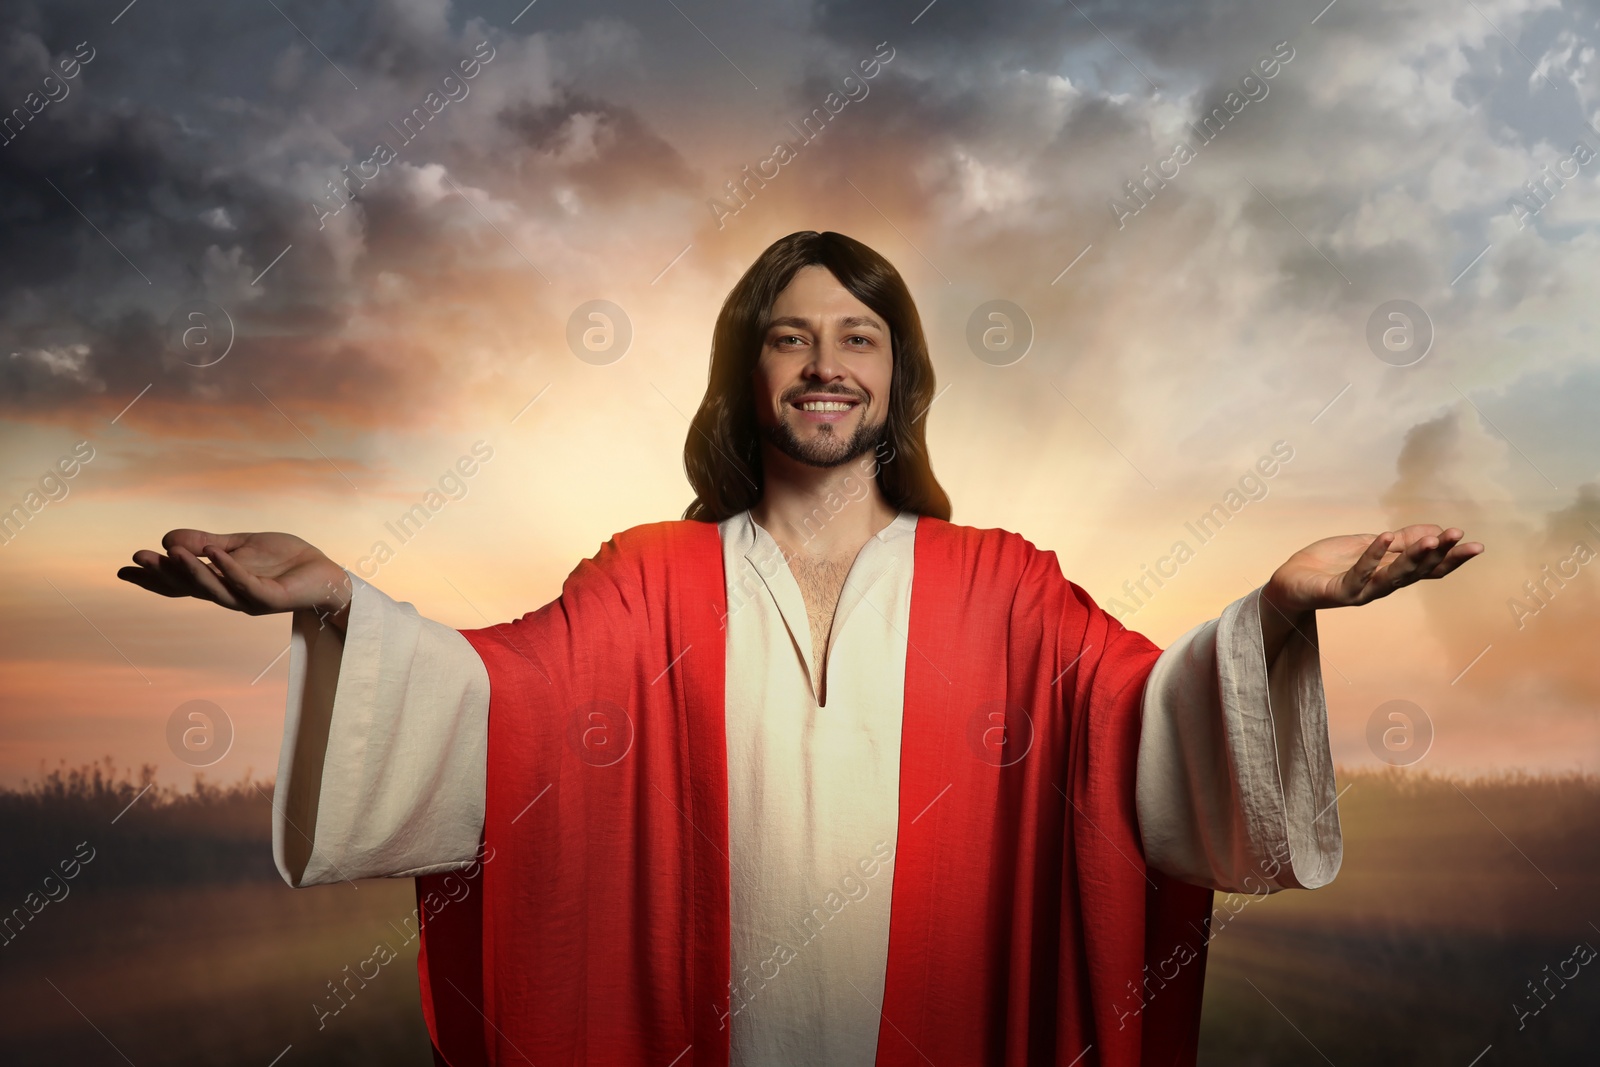 Image of Jesus Christ with outstretched arms outdoors 